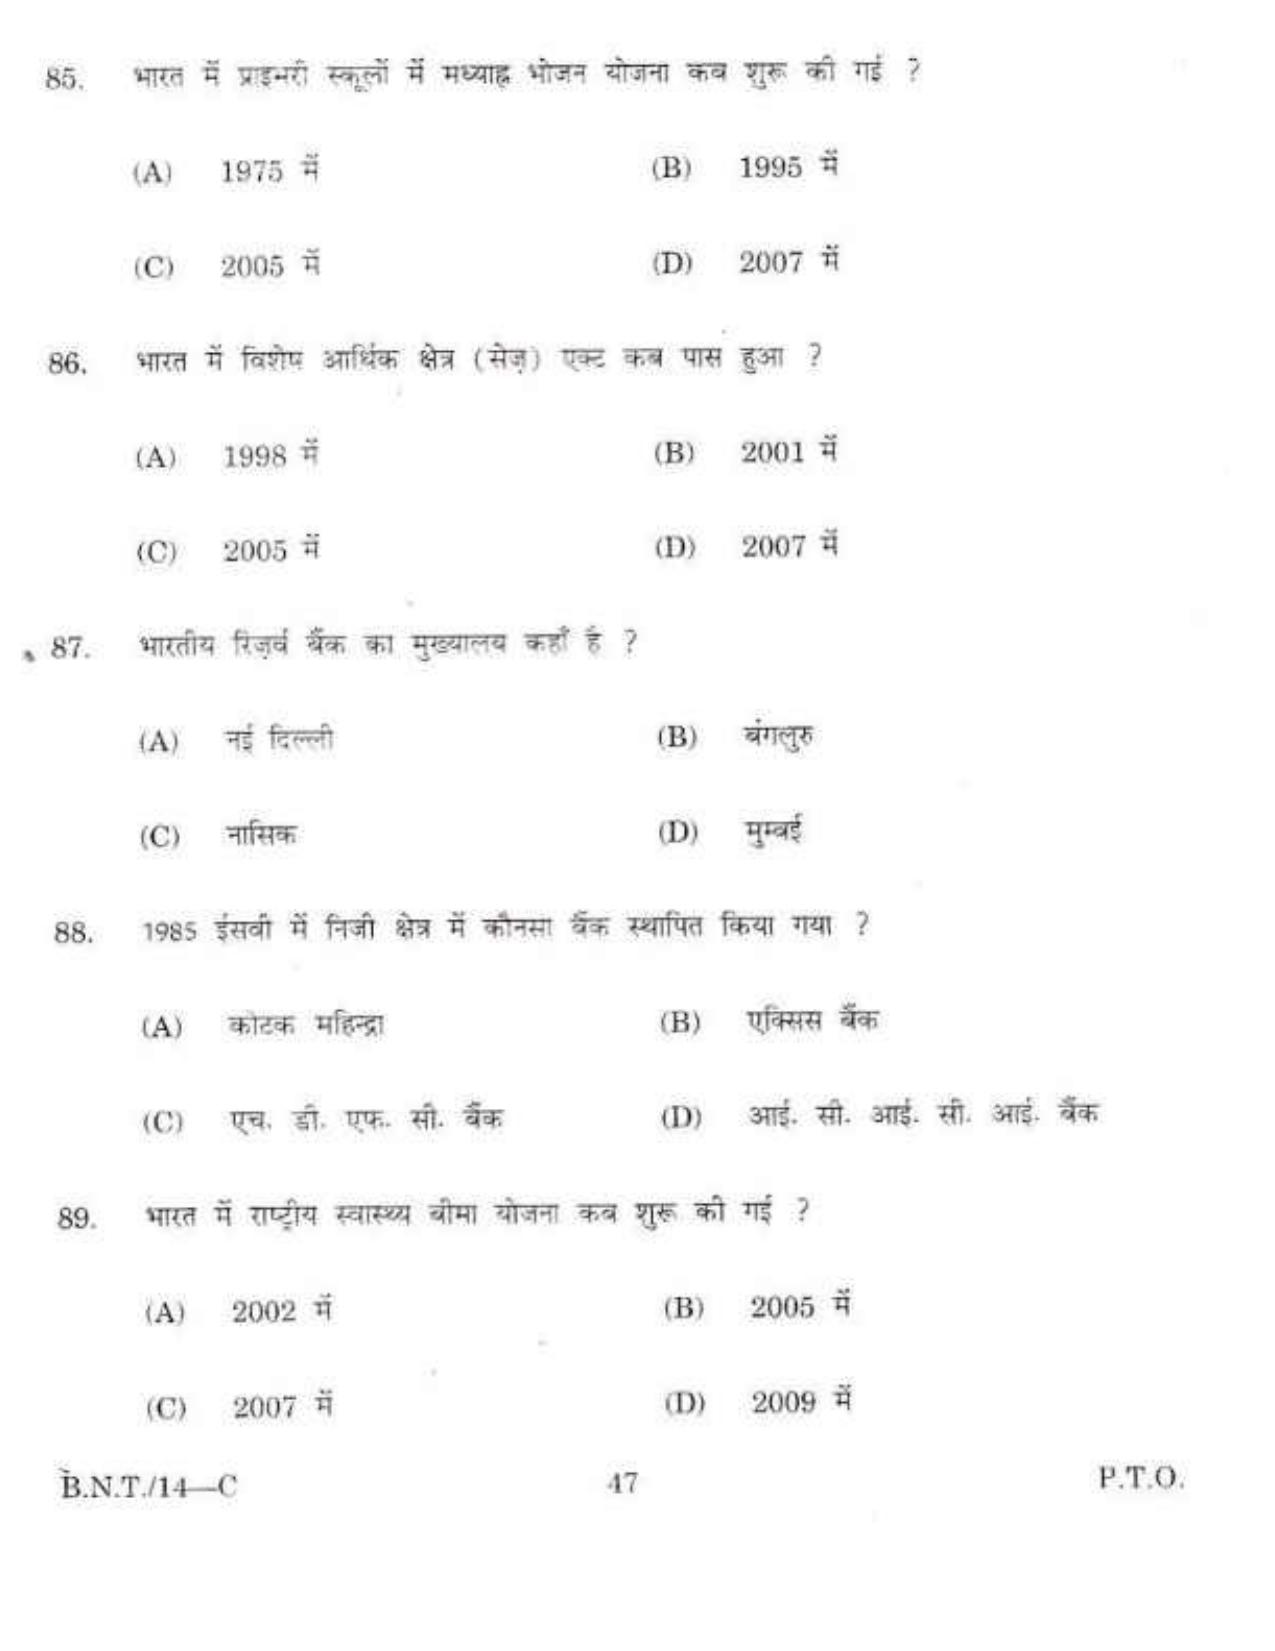 BSMFC Recovery Agent Old Question Papers for General Knowledge - Page 47